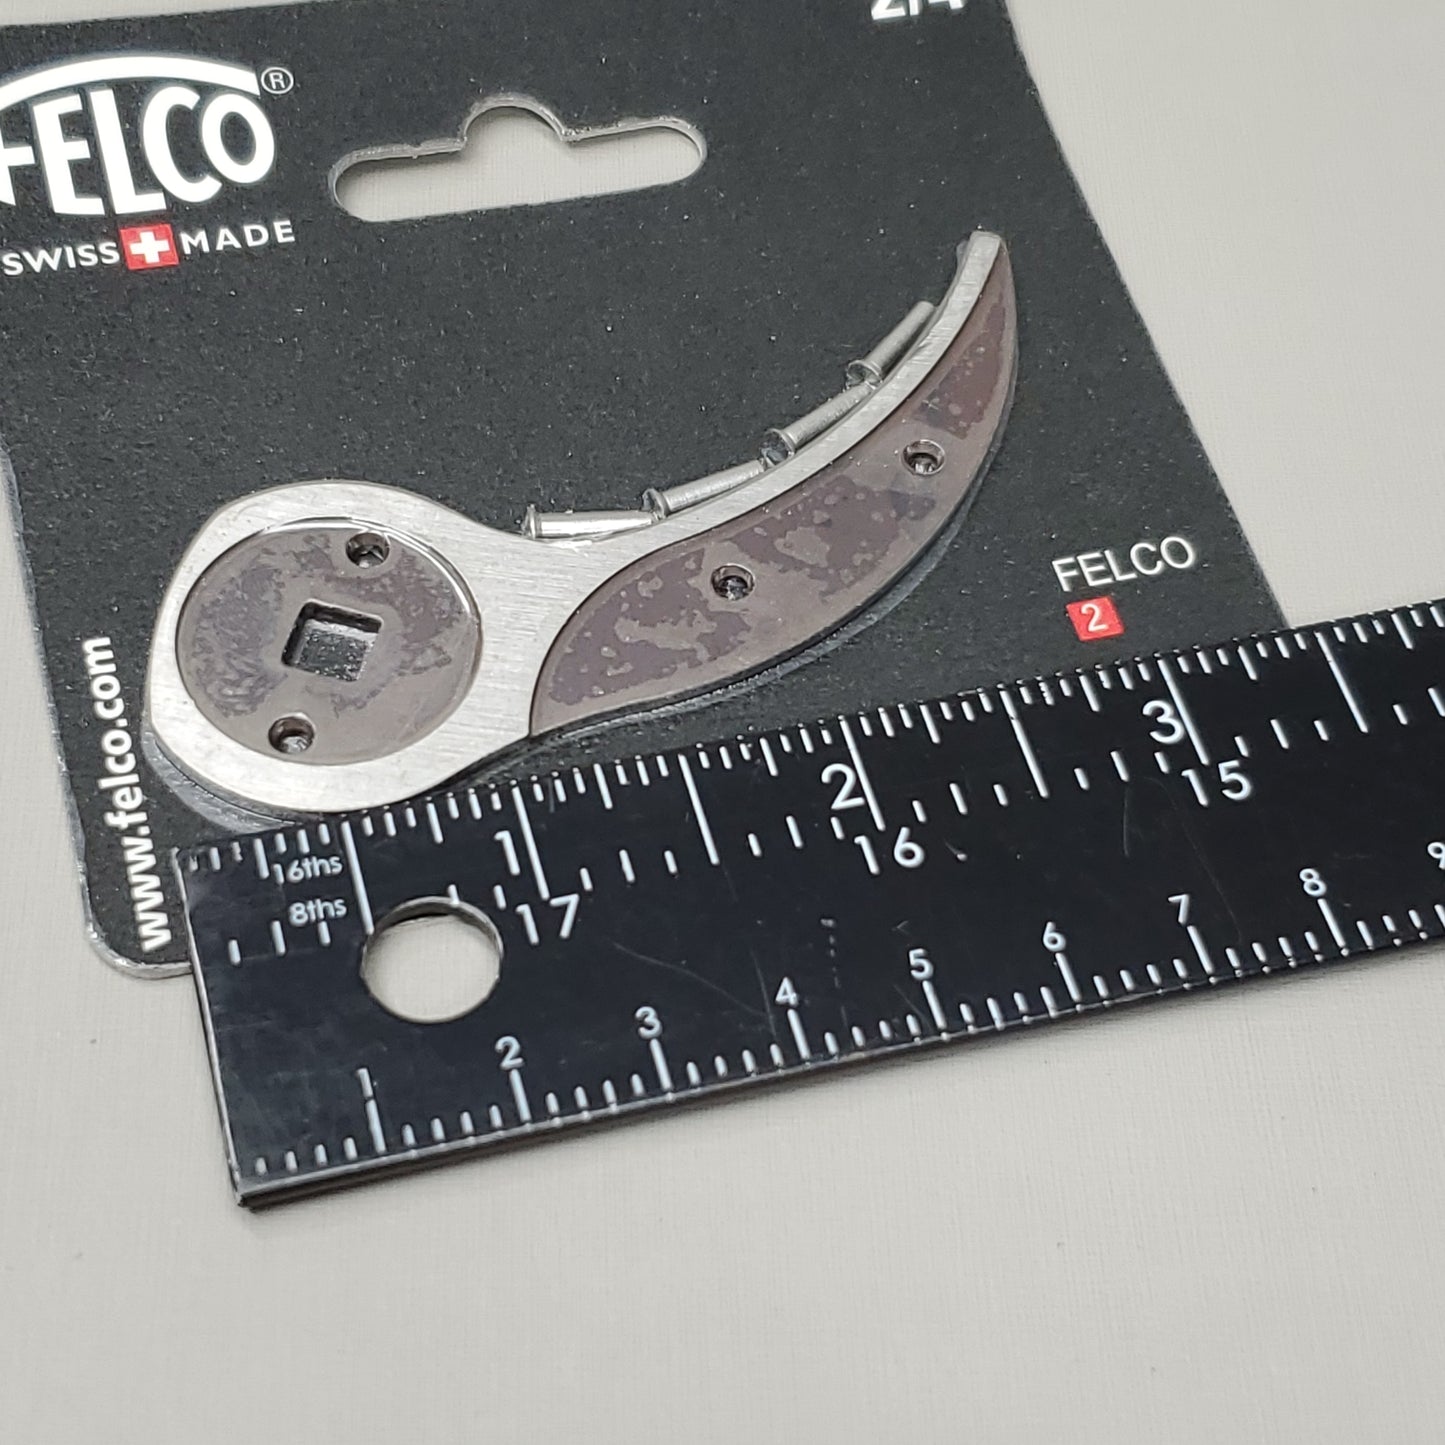 FELCO Swiss Made Pruner Replacement Anvil Blade With Rivets 2/4 (New)